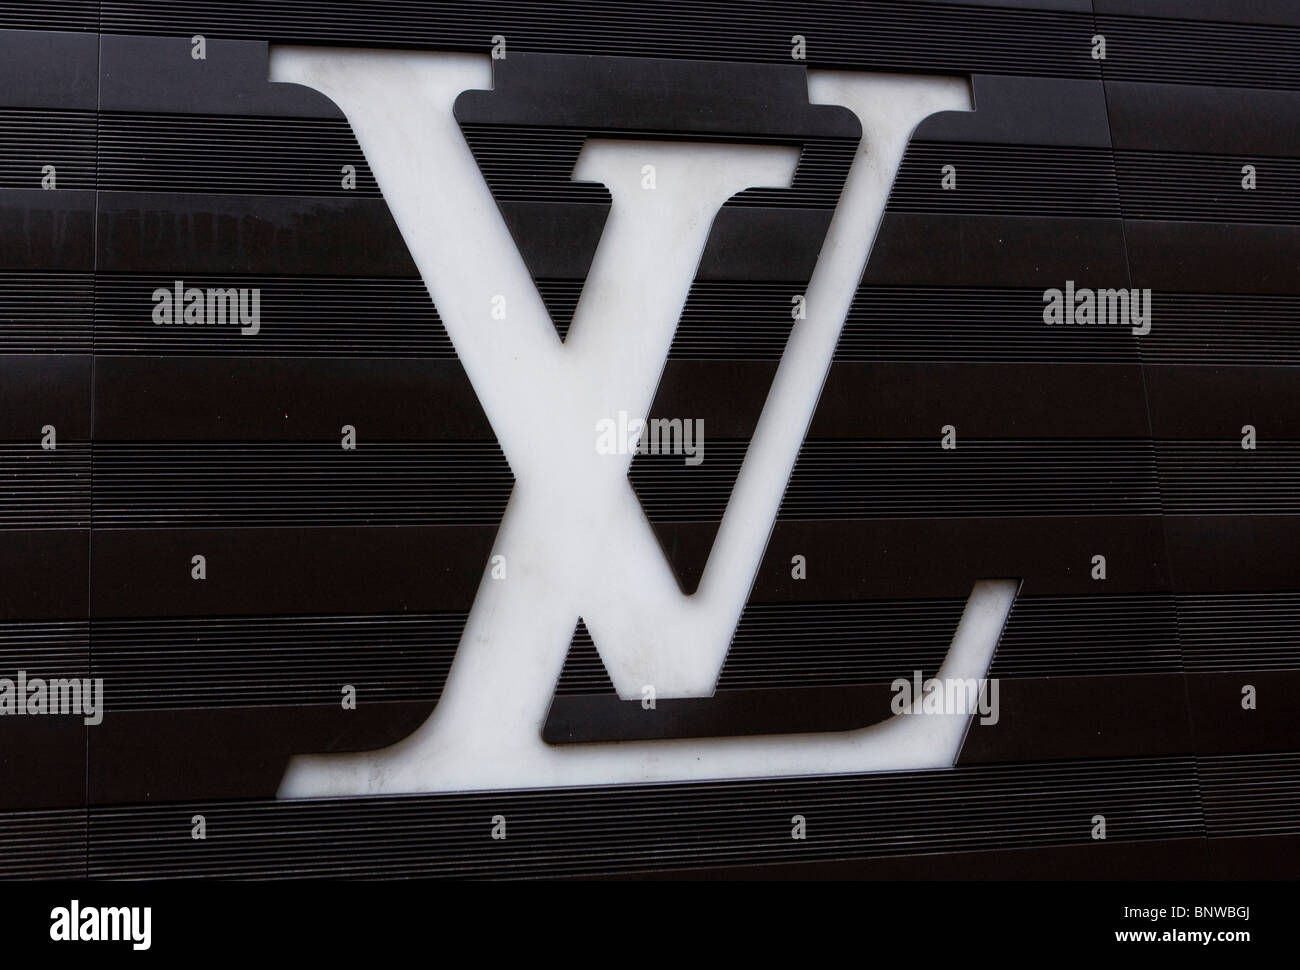 The Louis Vuitton website displayed on an Apple Macbook Pro Stock Photo -  Alamy